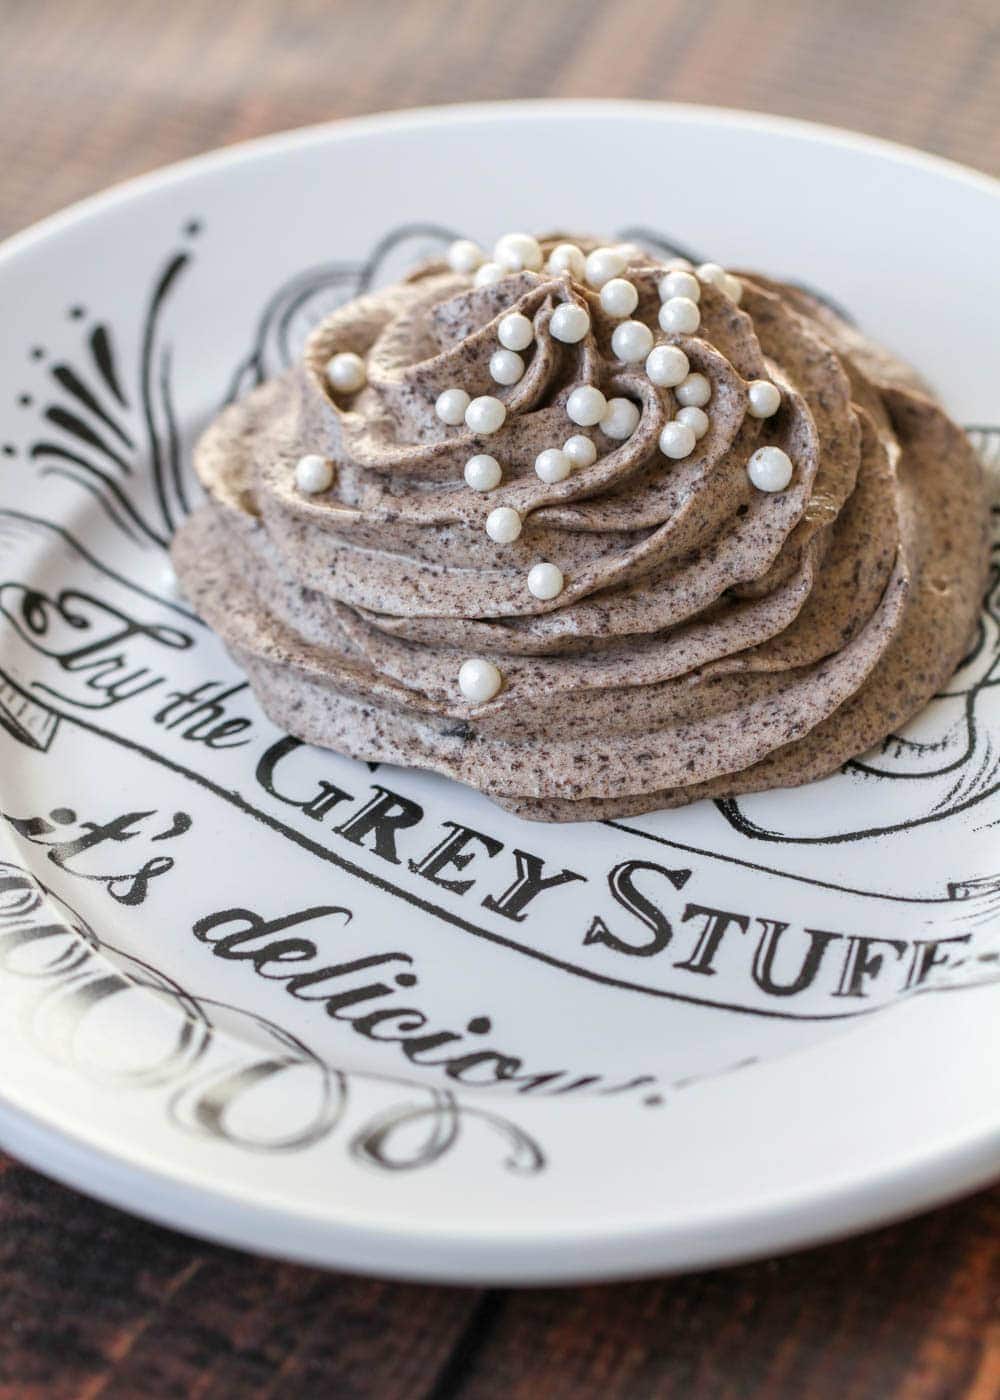 Be our Guest Grey Stuff recipe